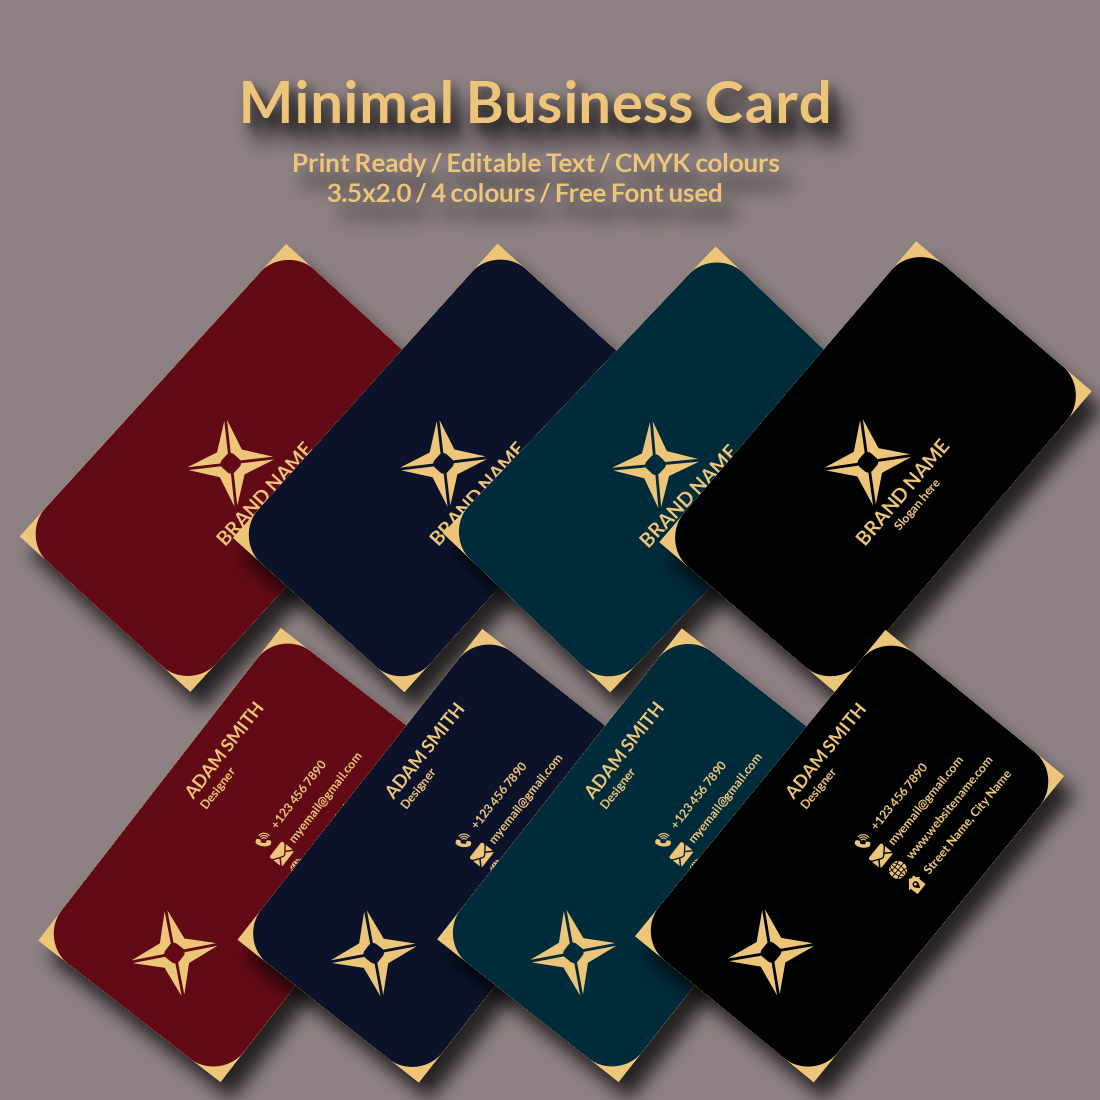 Minimal Luxury Business Card Design Template cover image.